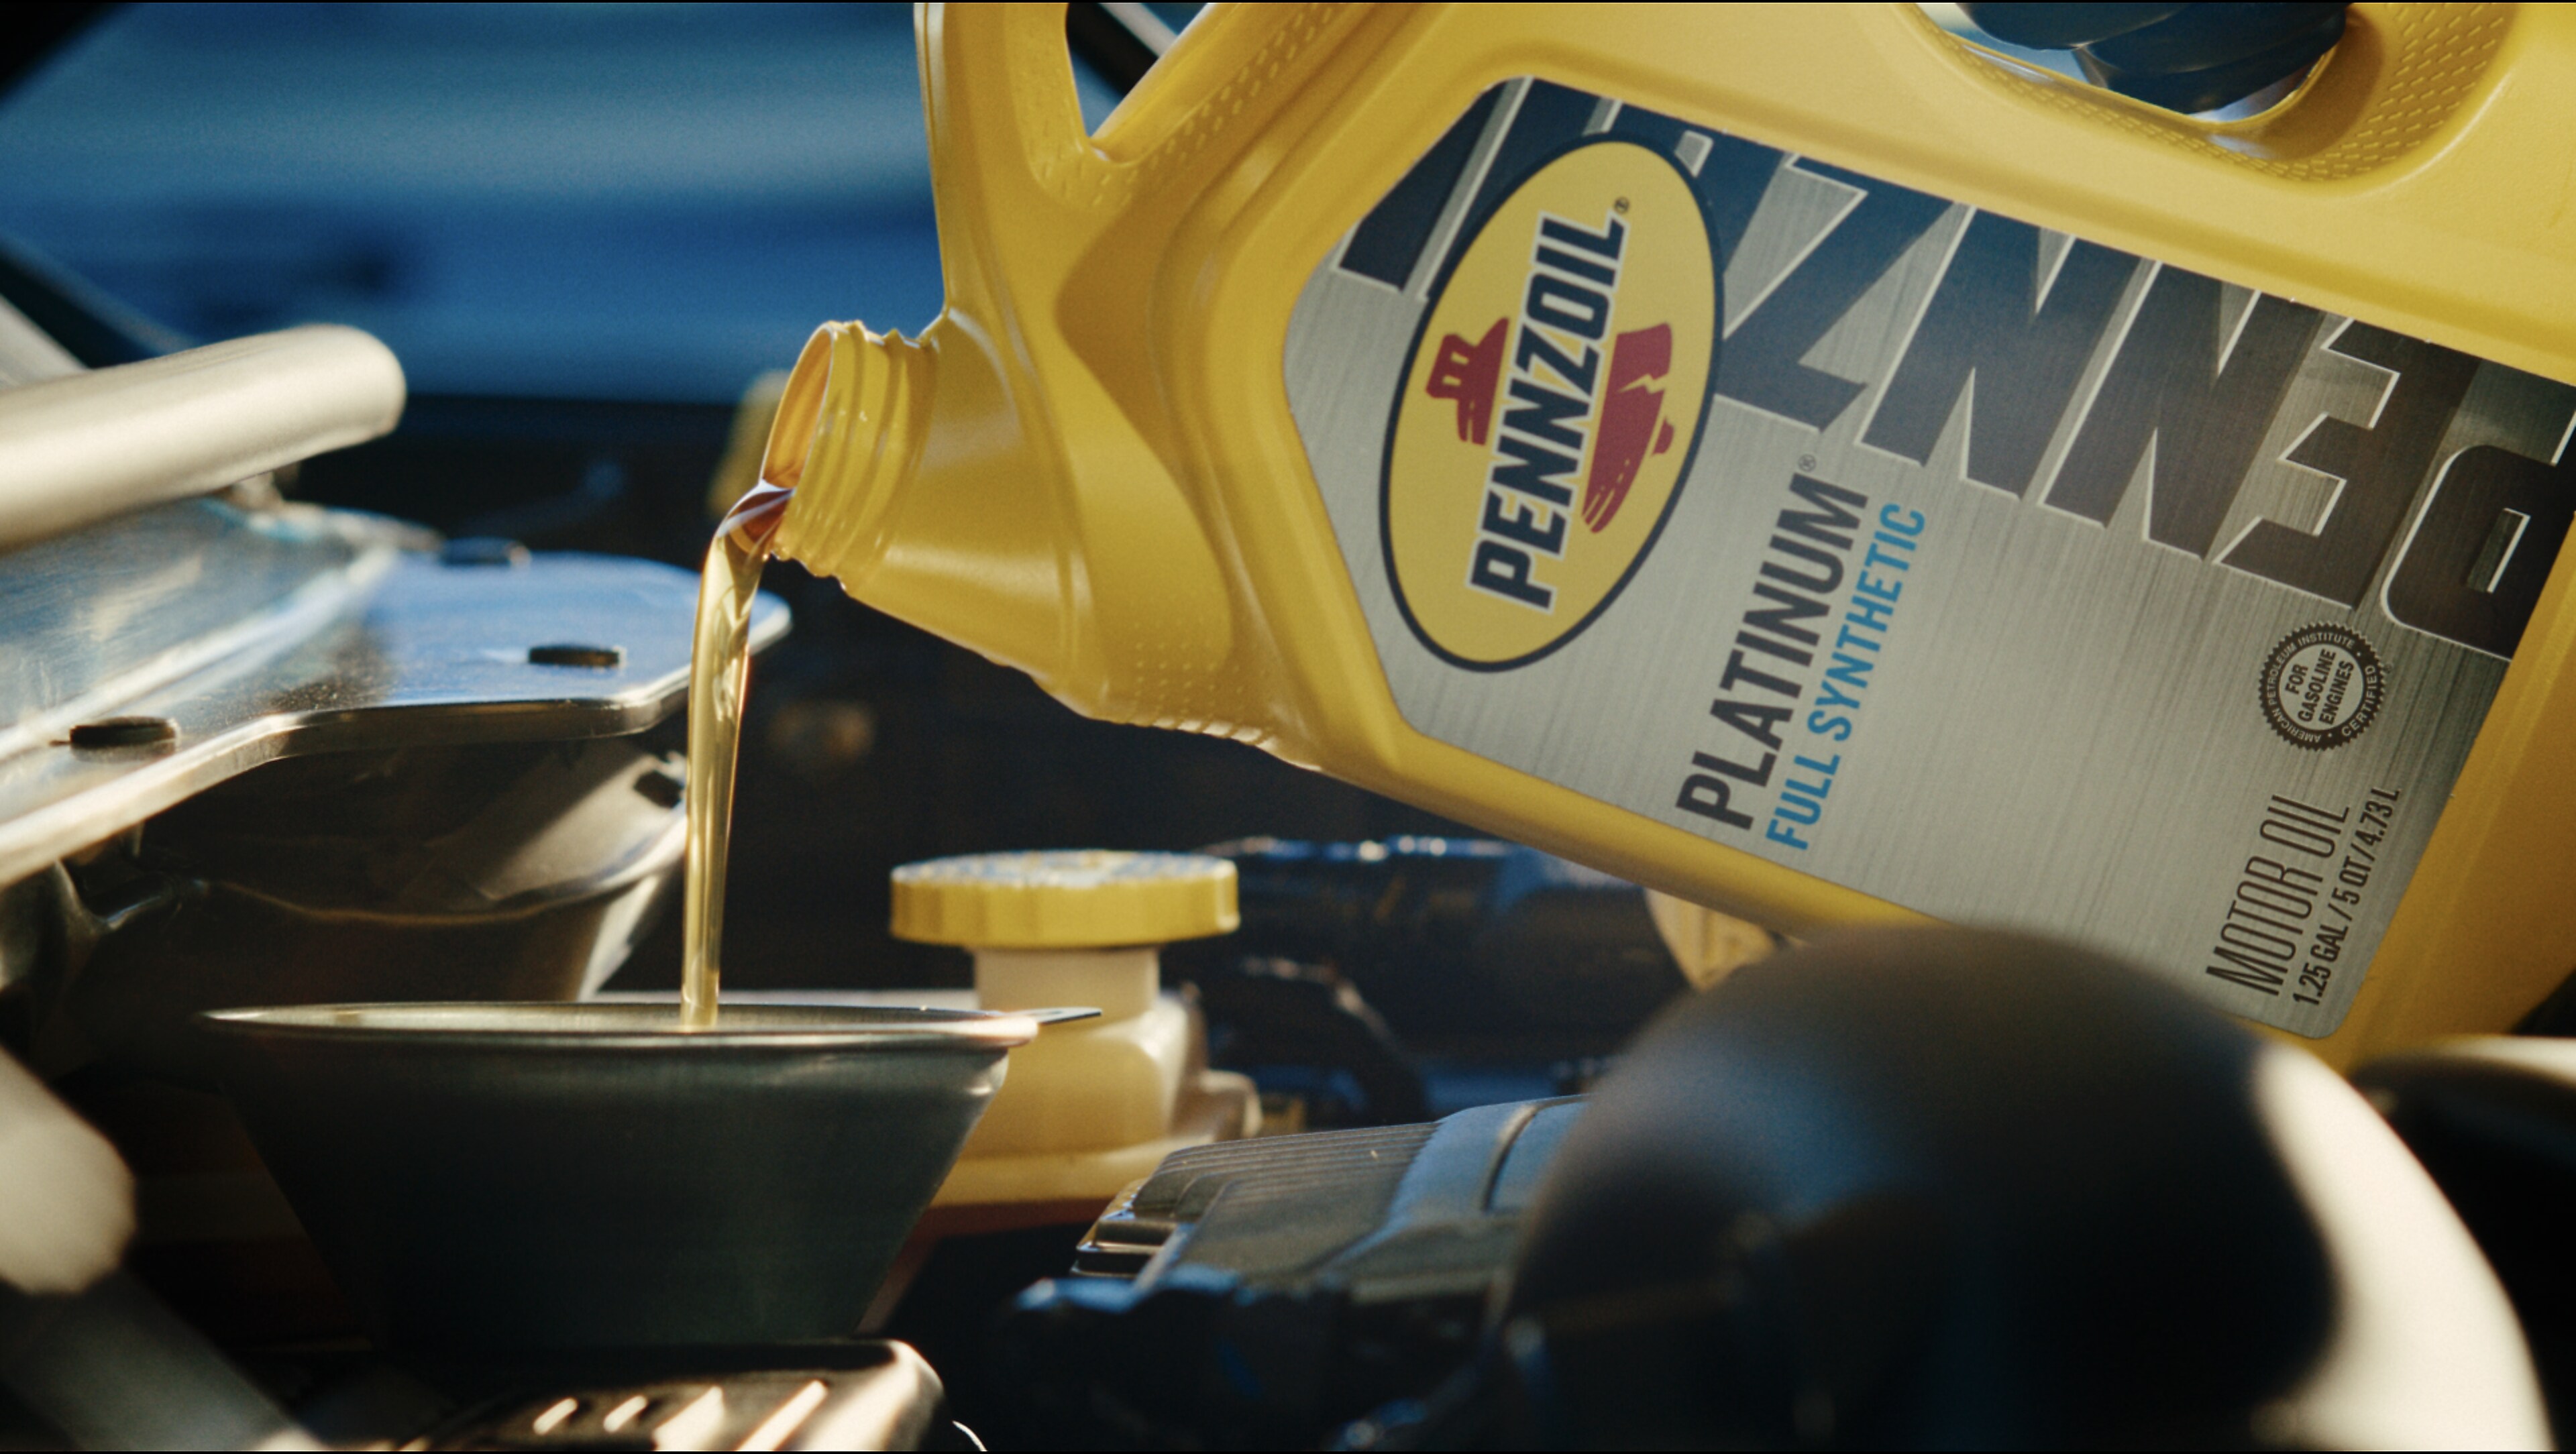 Pennzoil Oil Change Coupons And Discounts